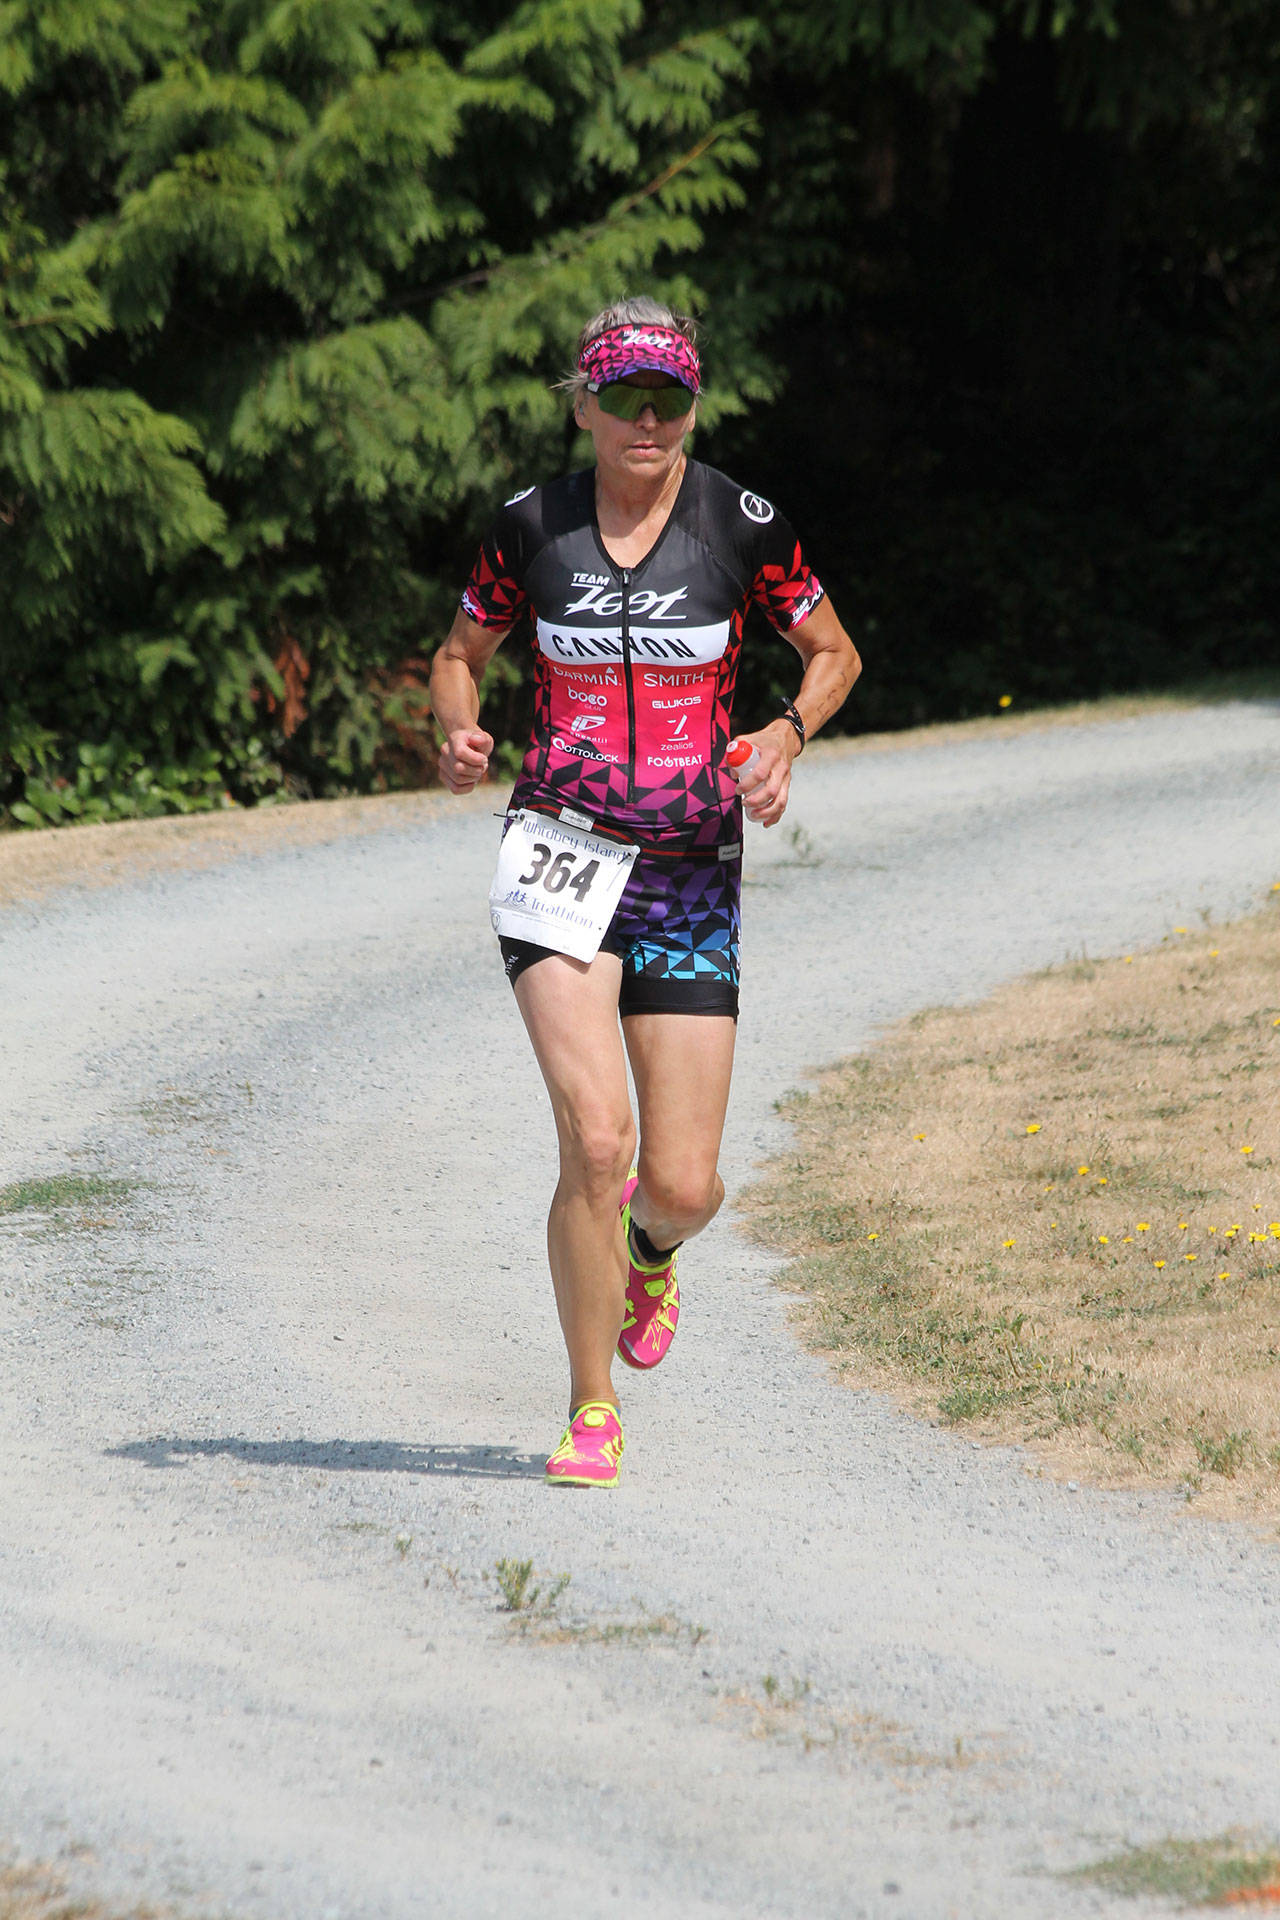 Christina Bromme runs through the trails of Langley’s Community Park during last weekend’s Whidbey Island Triathlon. (Photo by Jim Waller/Whidbey News-Times)